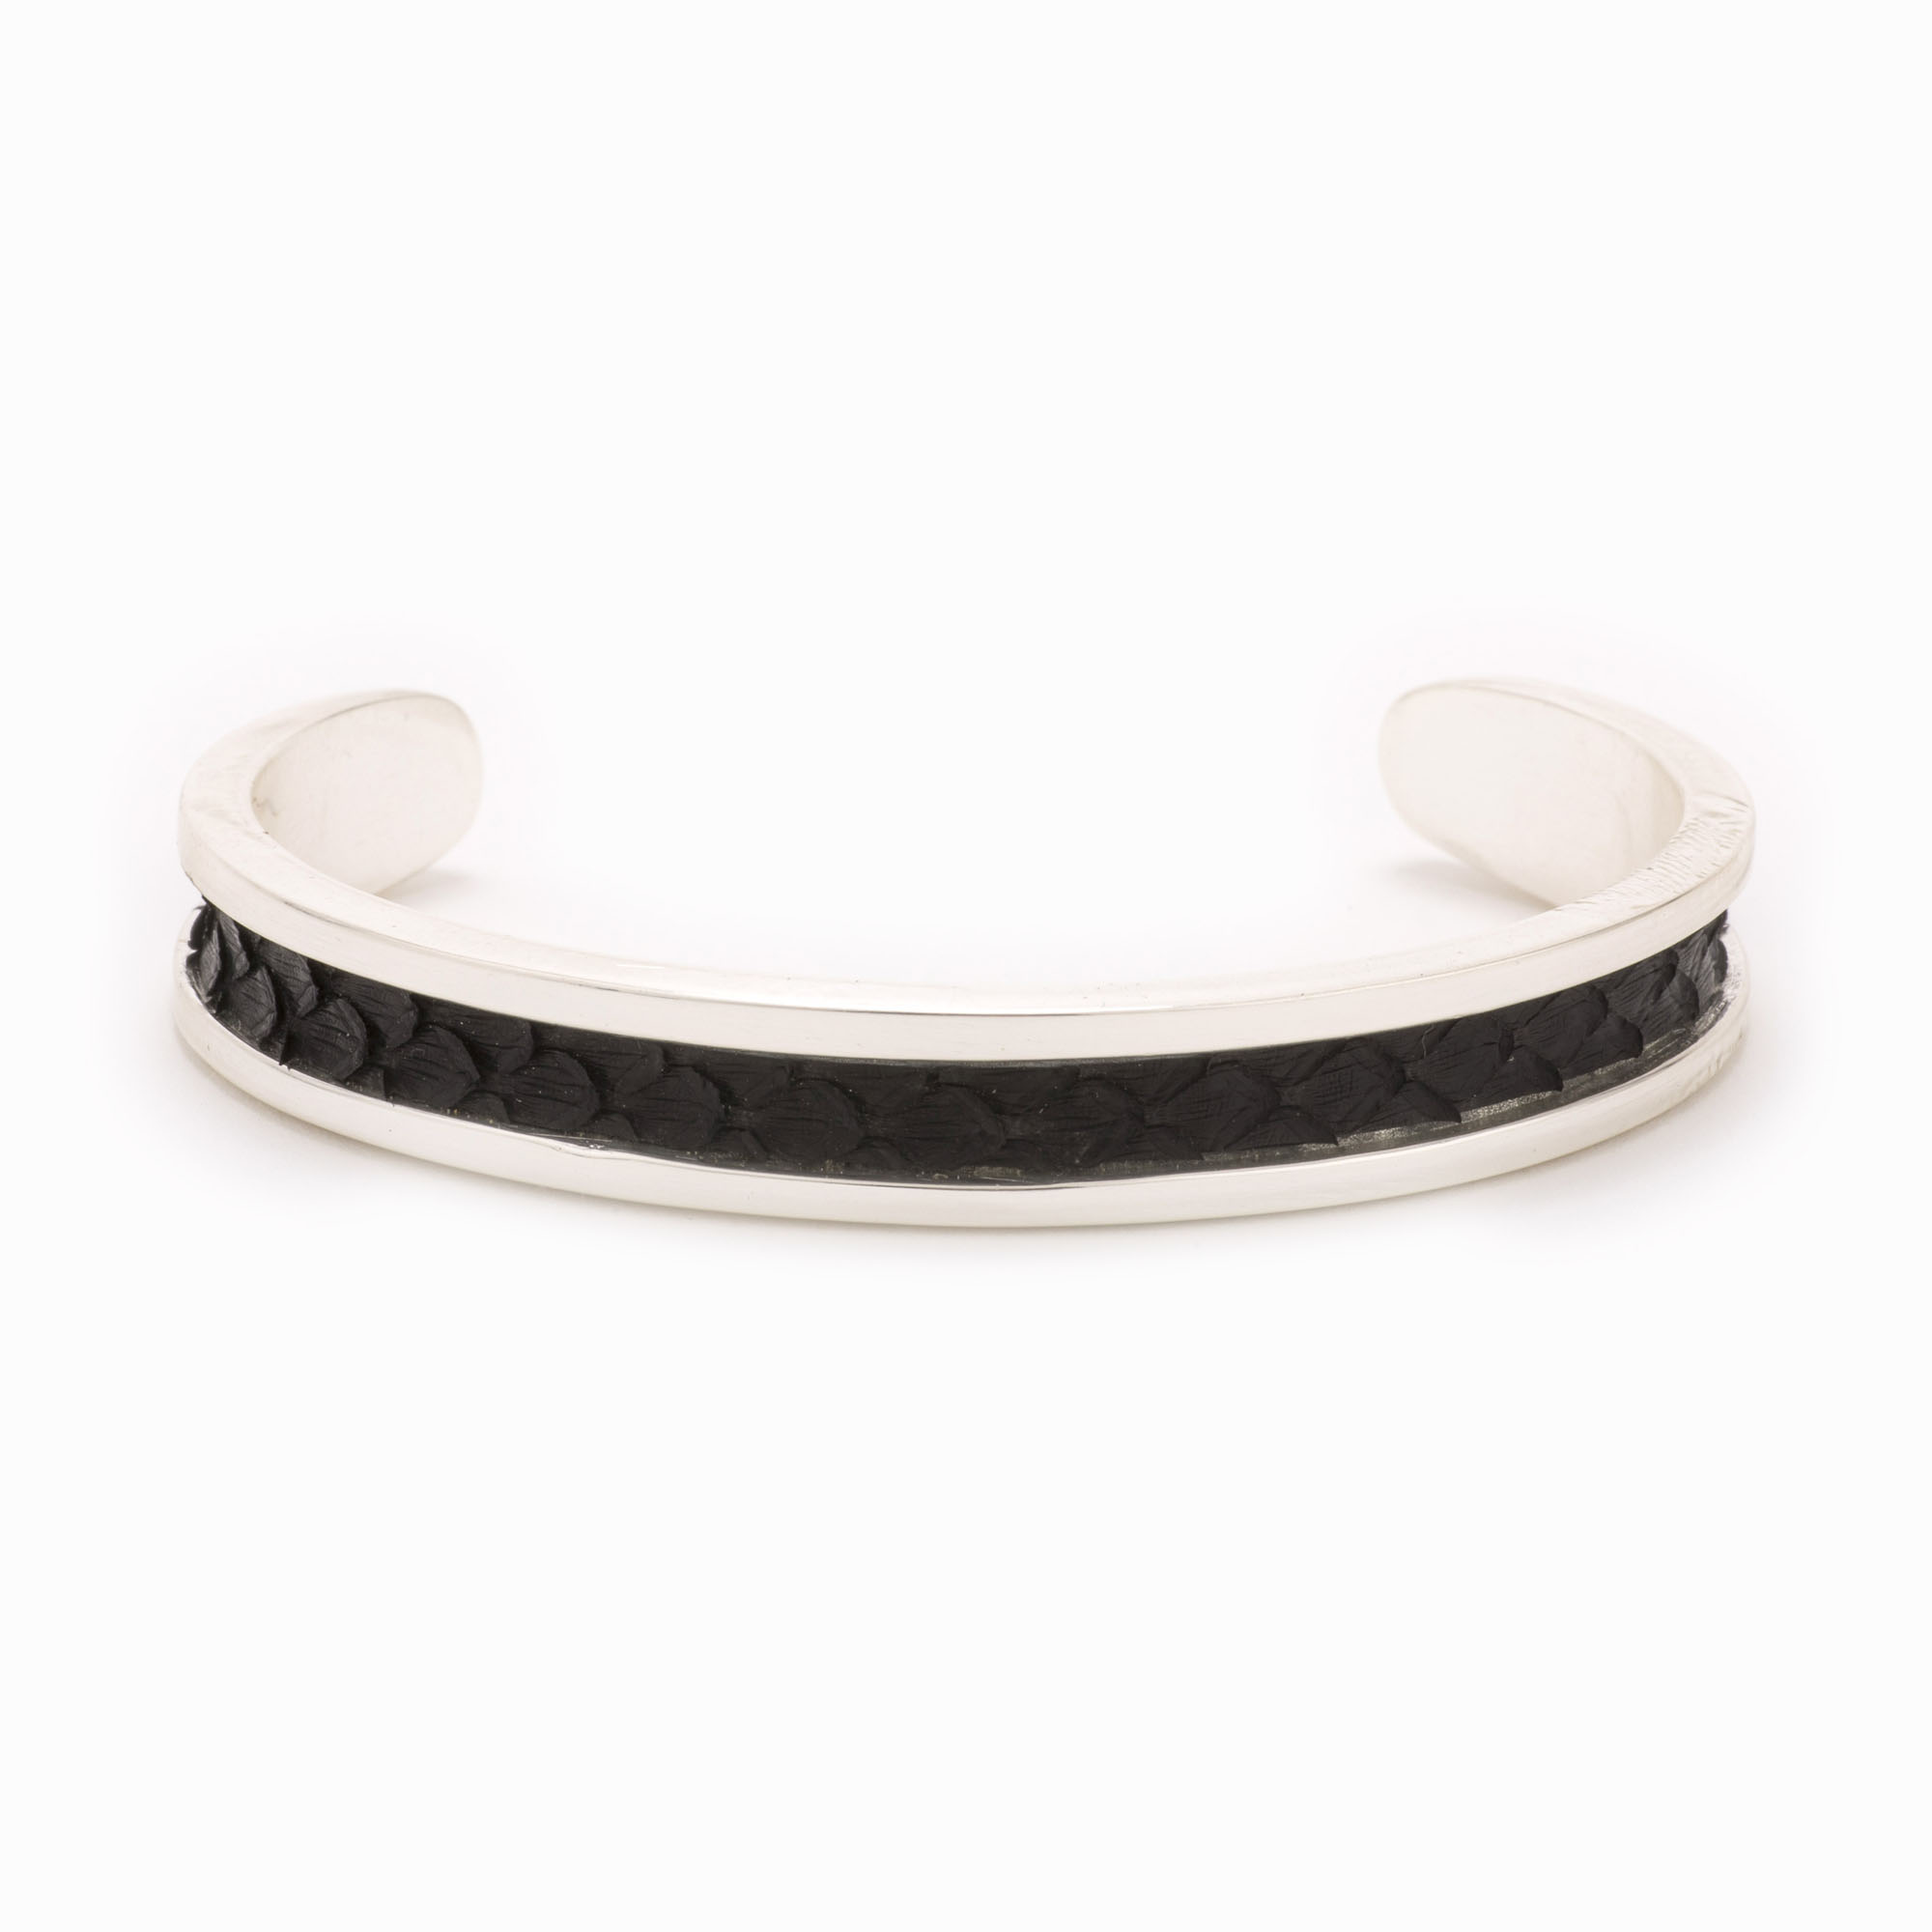 Featured image for “Small Black Silver Cuff”